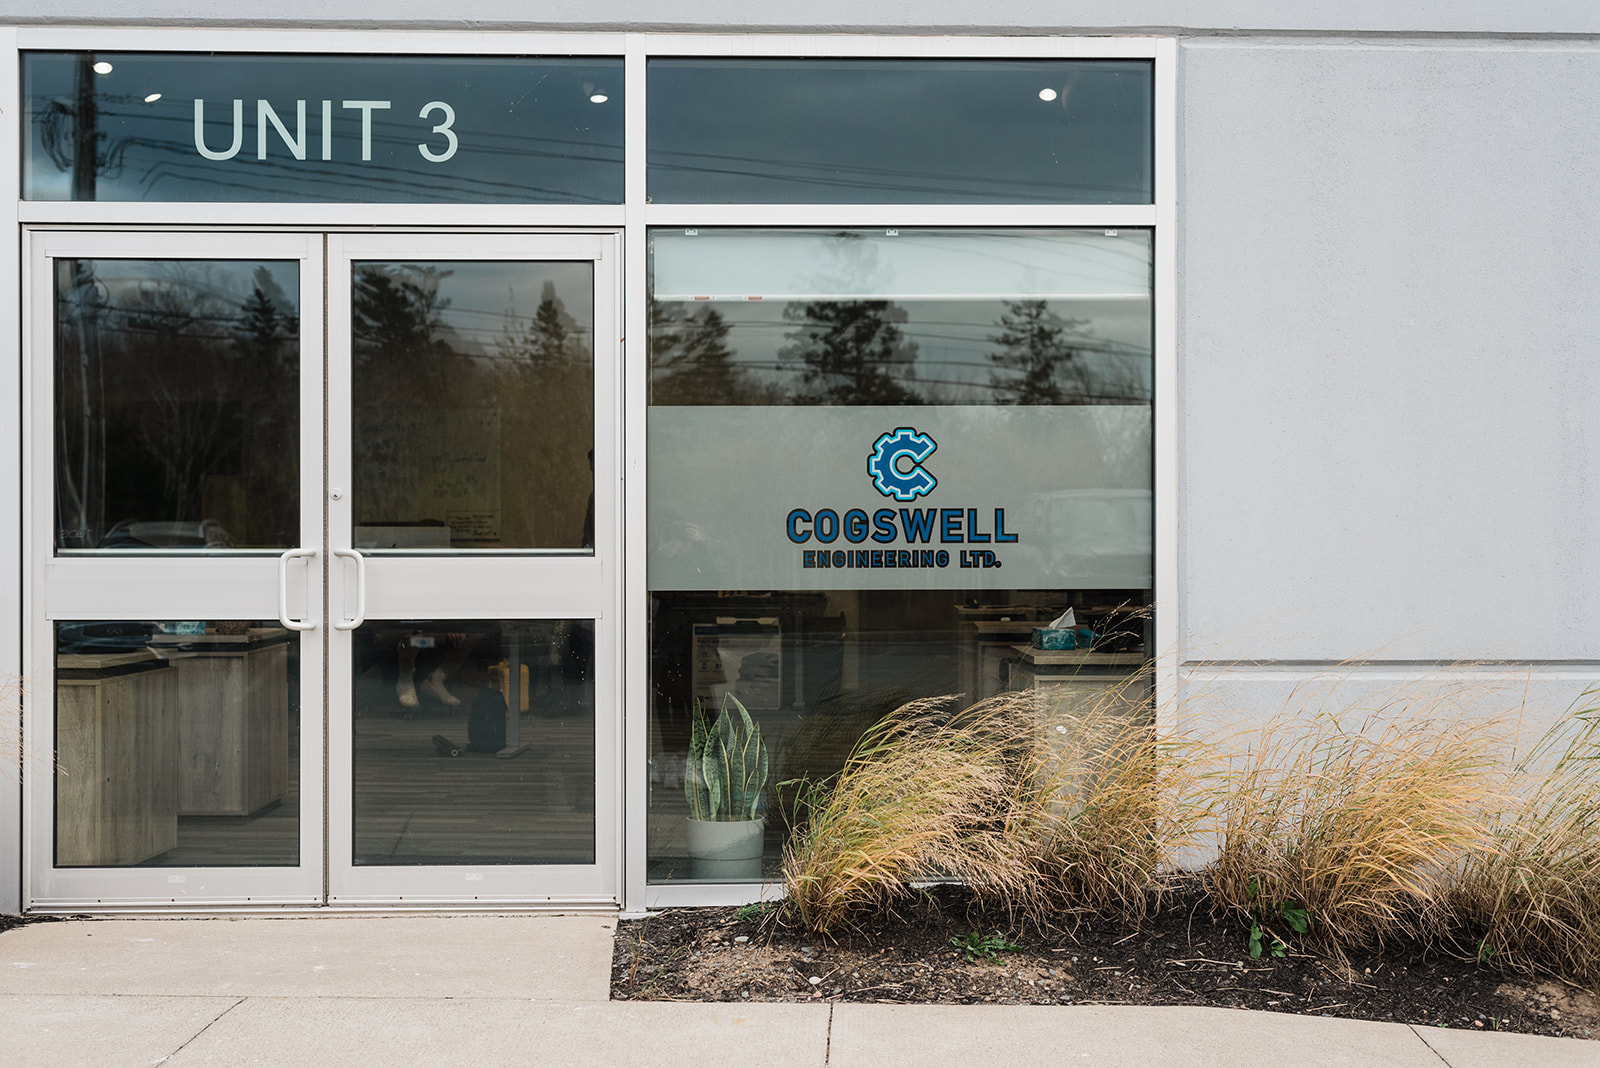 Cogswell Engineering